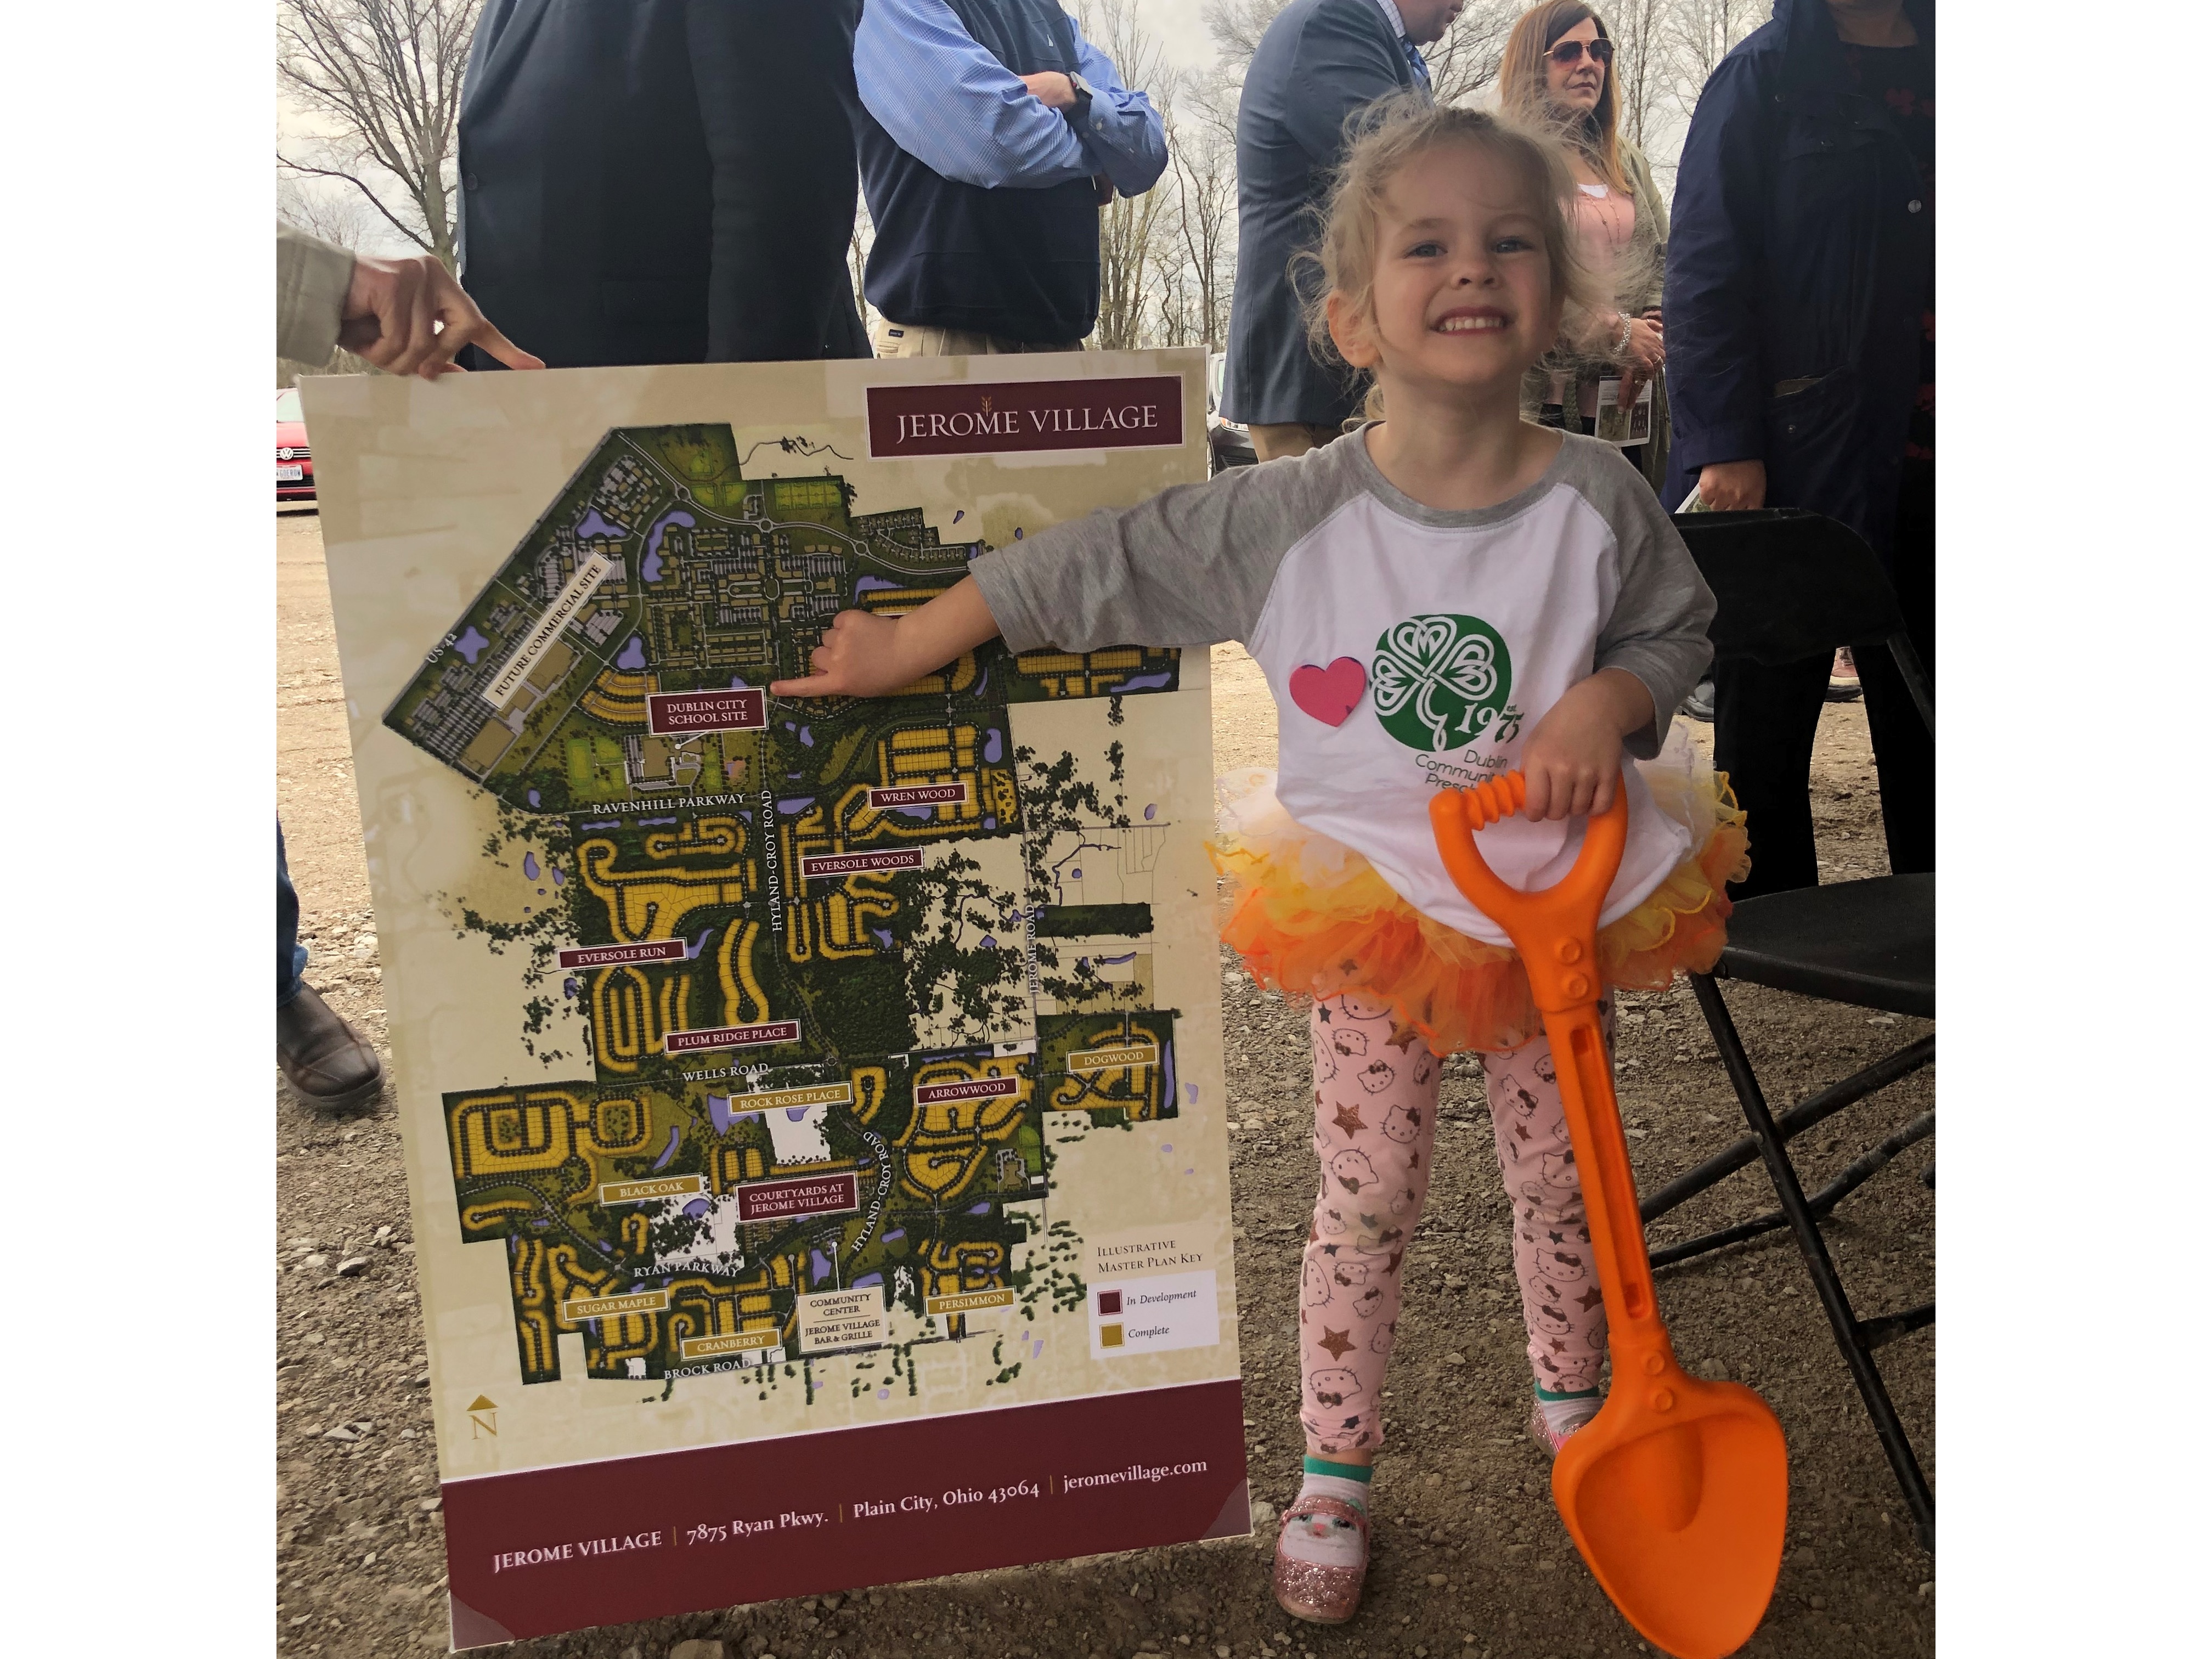 Girl with toy shovel standing next to Jerome Village master plan